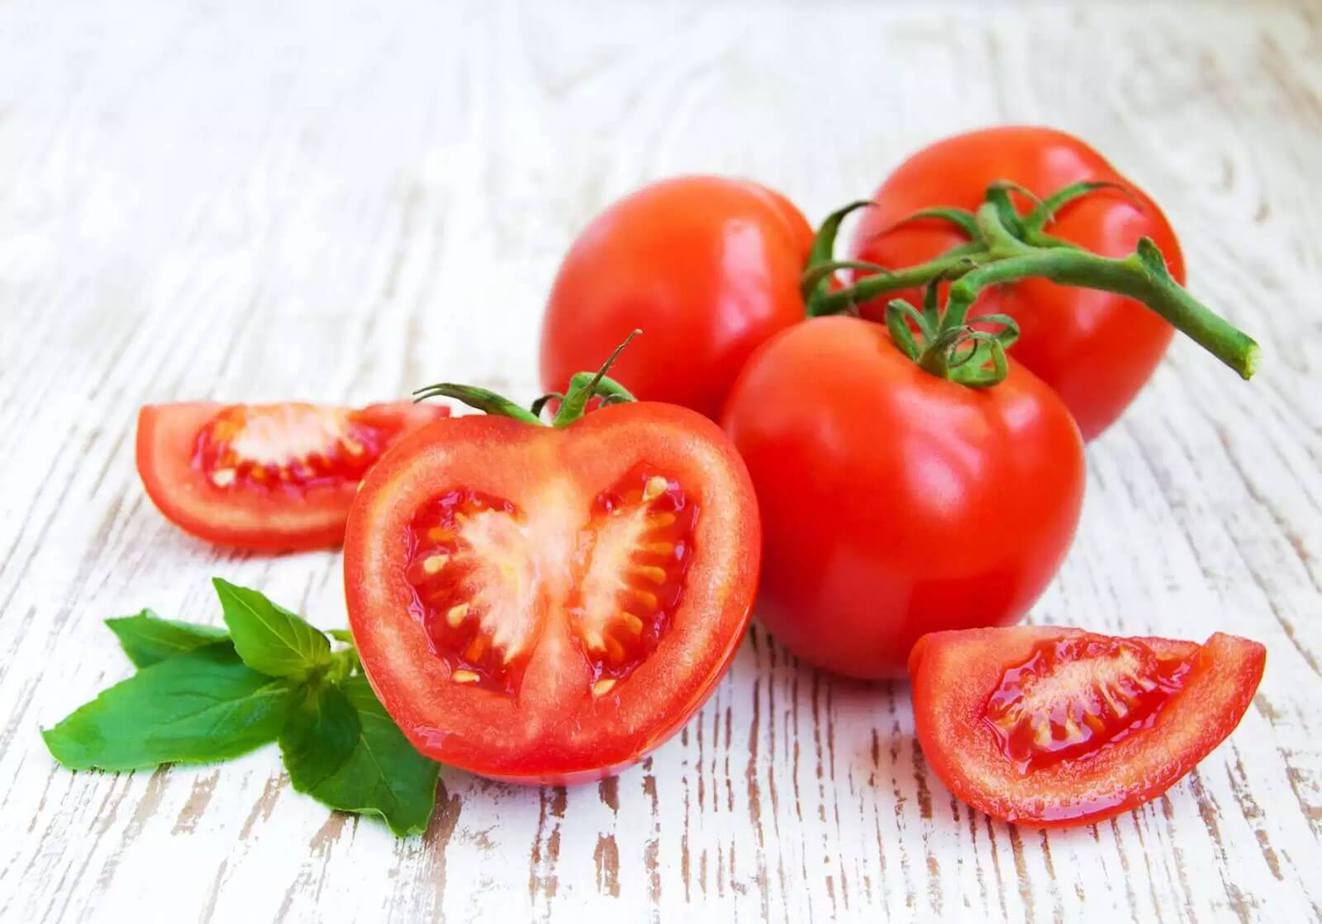 How to treat back acne with tomatoes